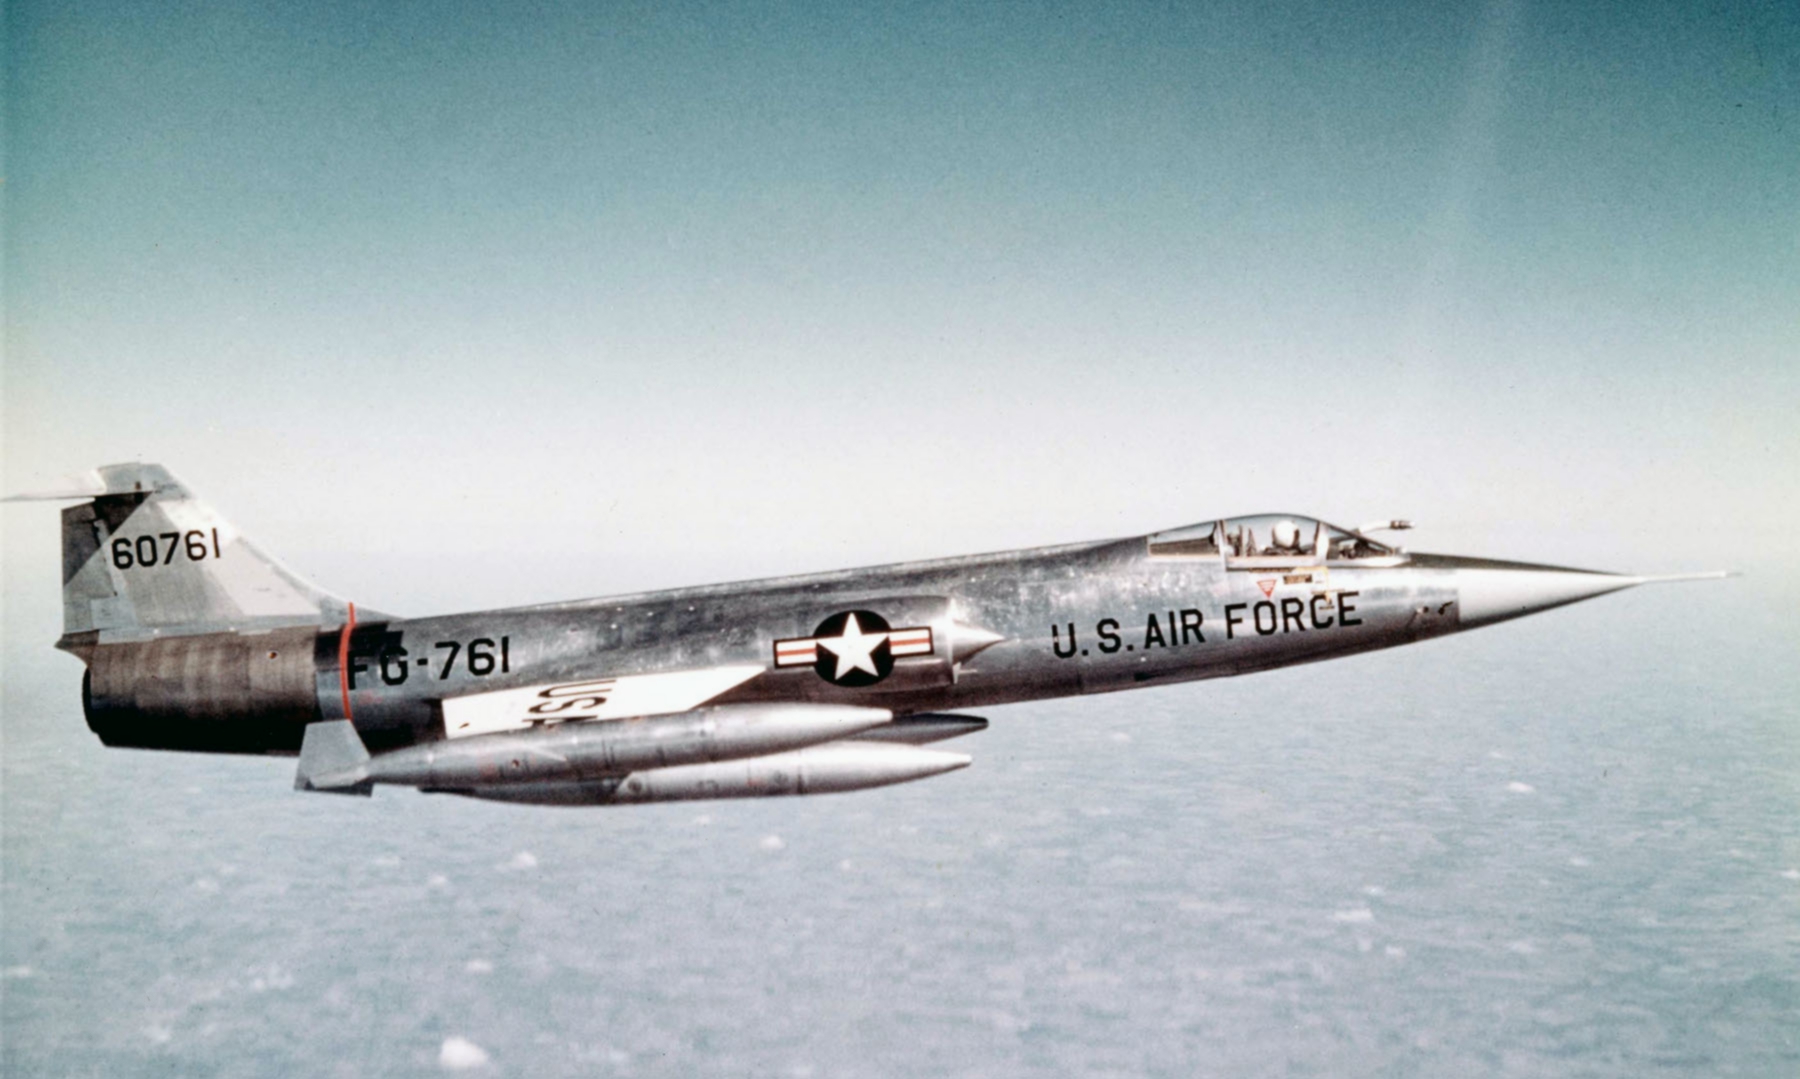 The same type aircraft as that flown by Einar K. Enevoldson, this is a Lockheed F-104A-10-LO Starfighter, 56-761. It is carrying both wingtip and underwing fuel tanks. (U.S. Air Force)